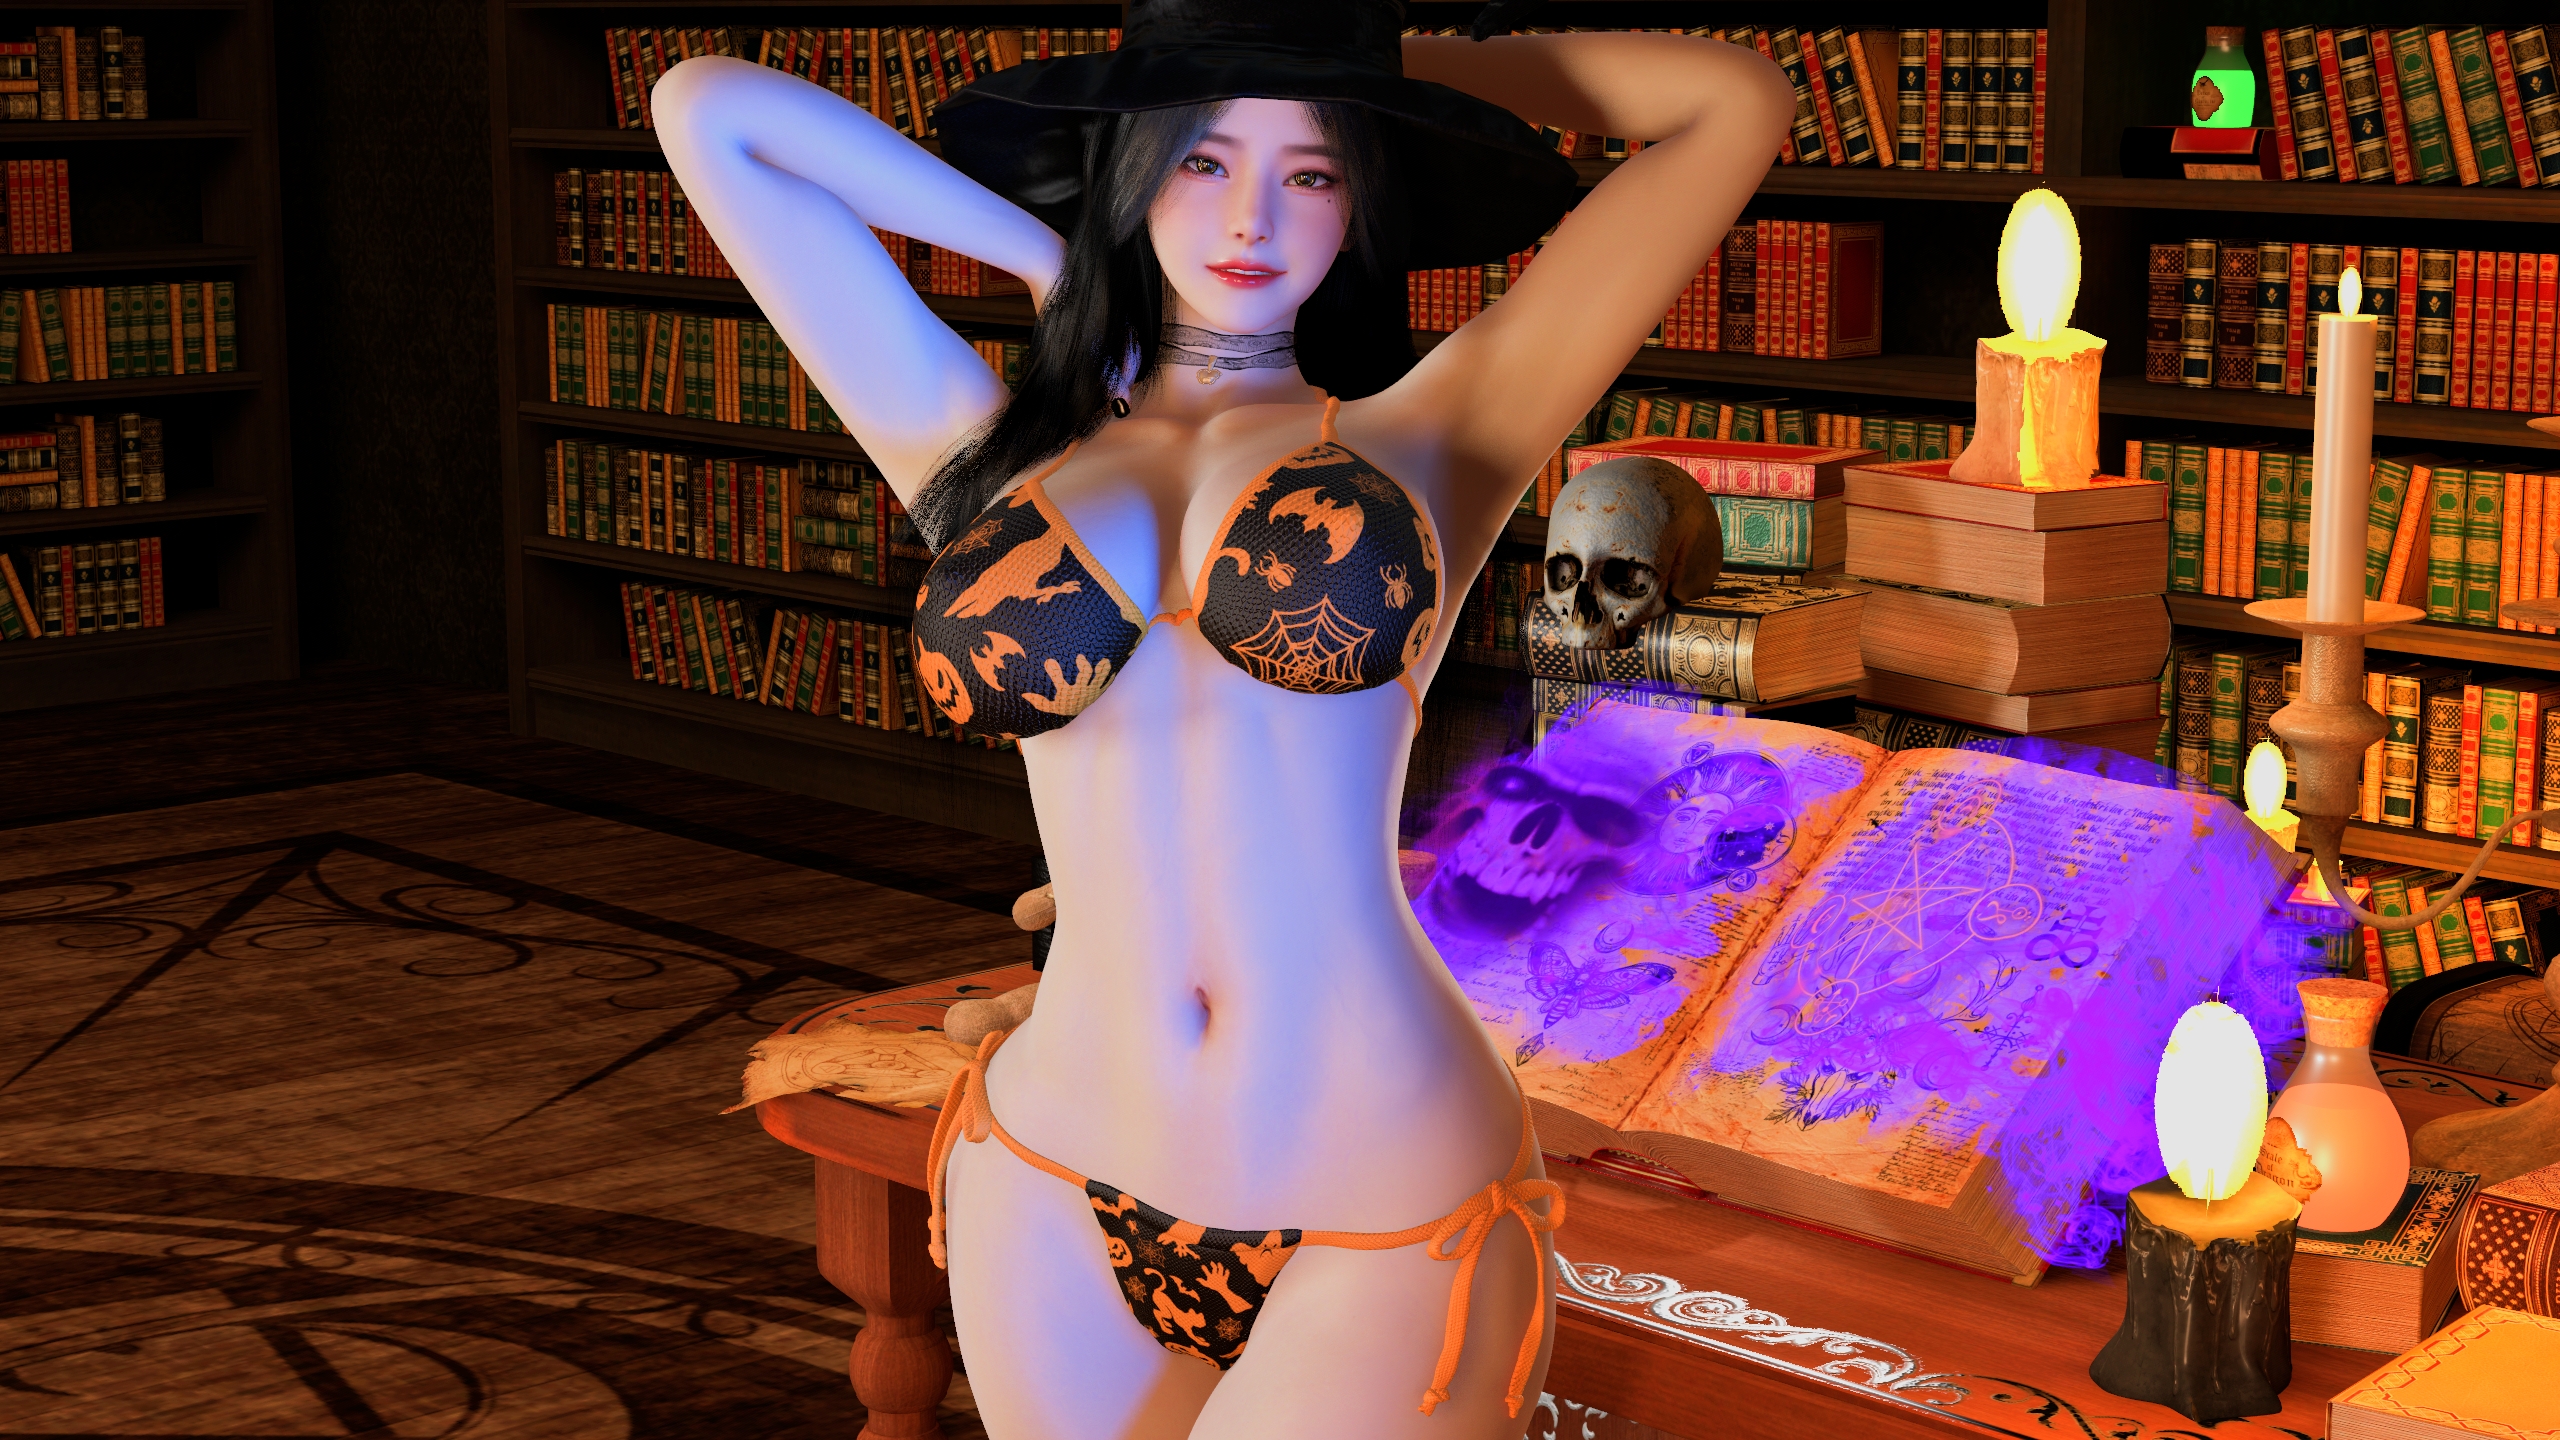 Community Contributions - October   Naked Lingerie Sexy Lingerie Boobs Big boobs 3d Porn 3d Girl Elf Dress 27